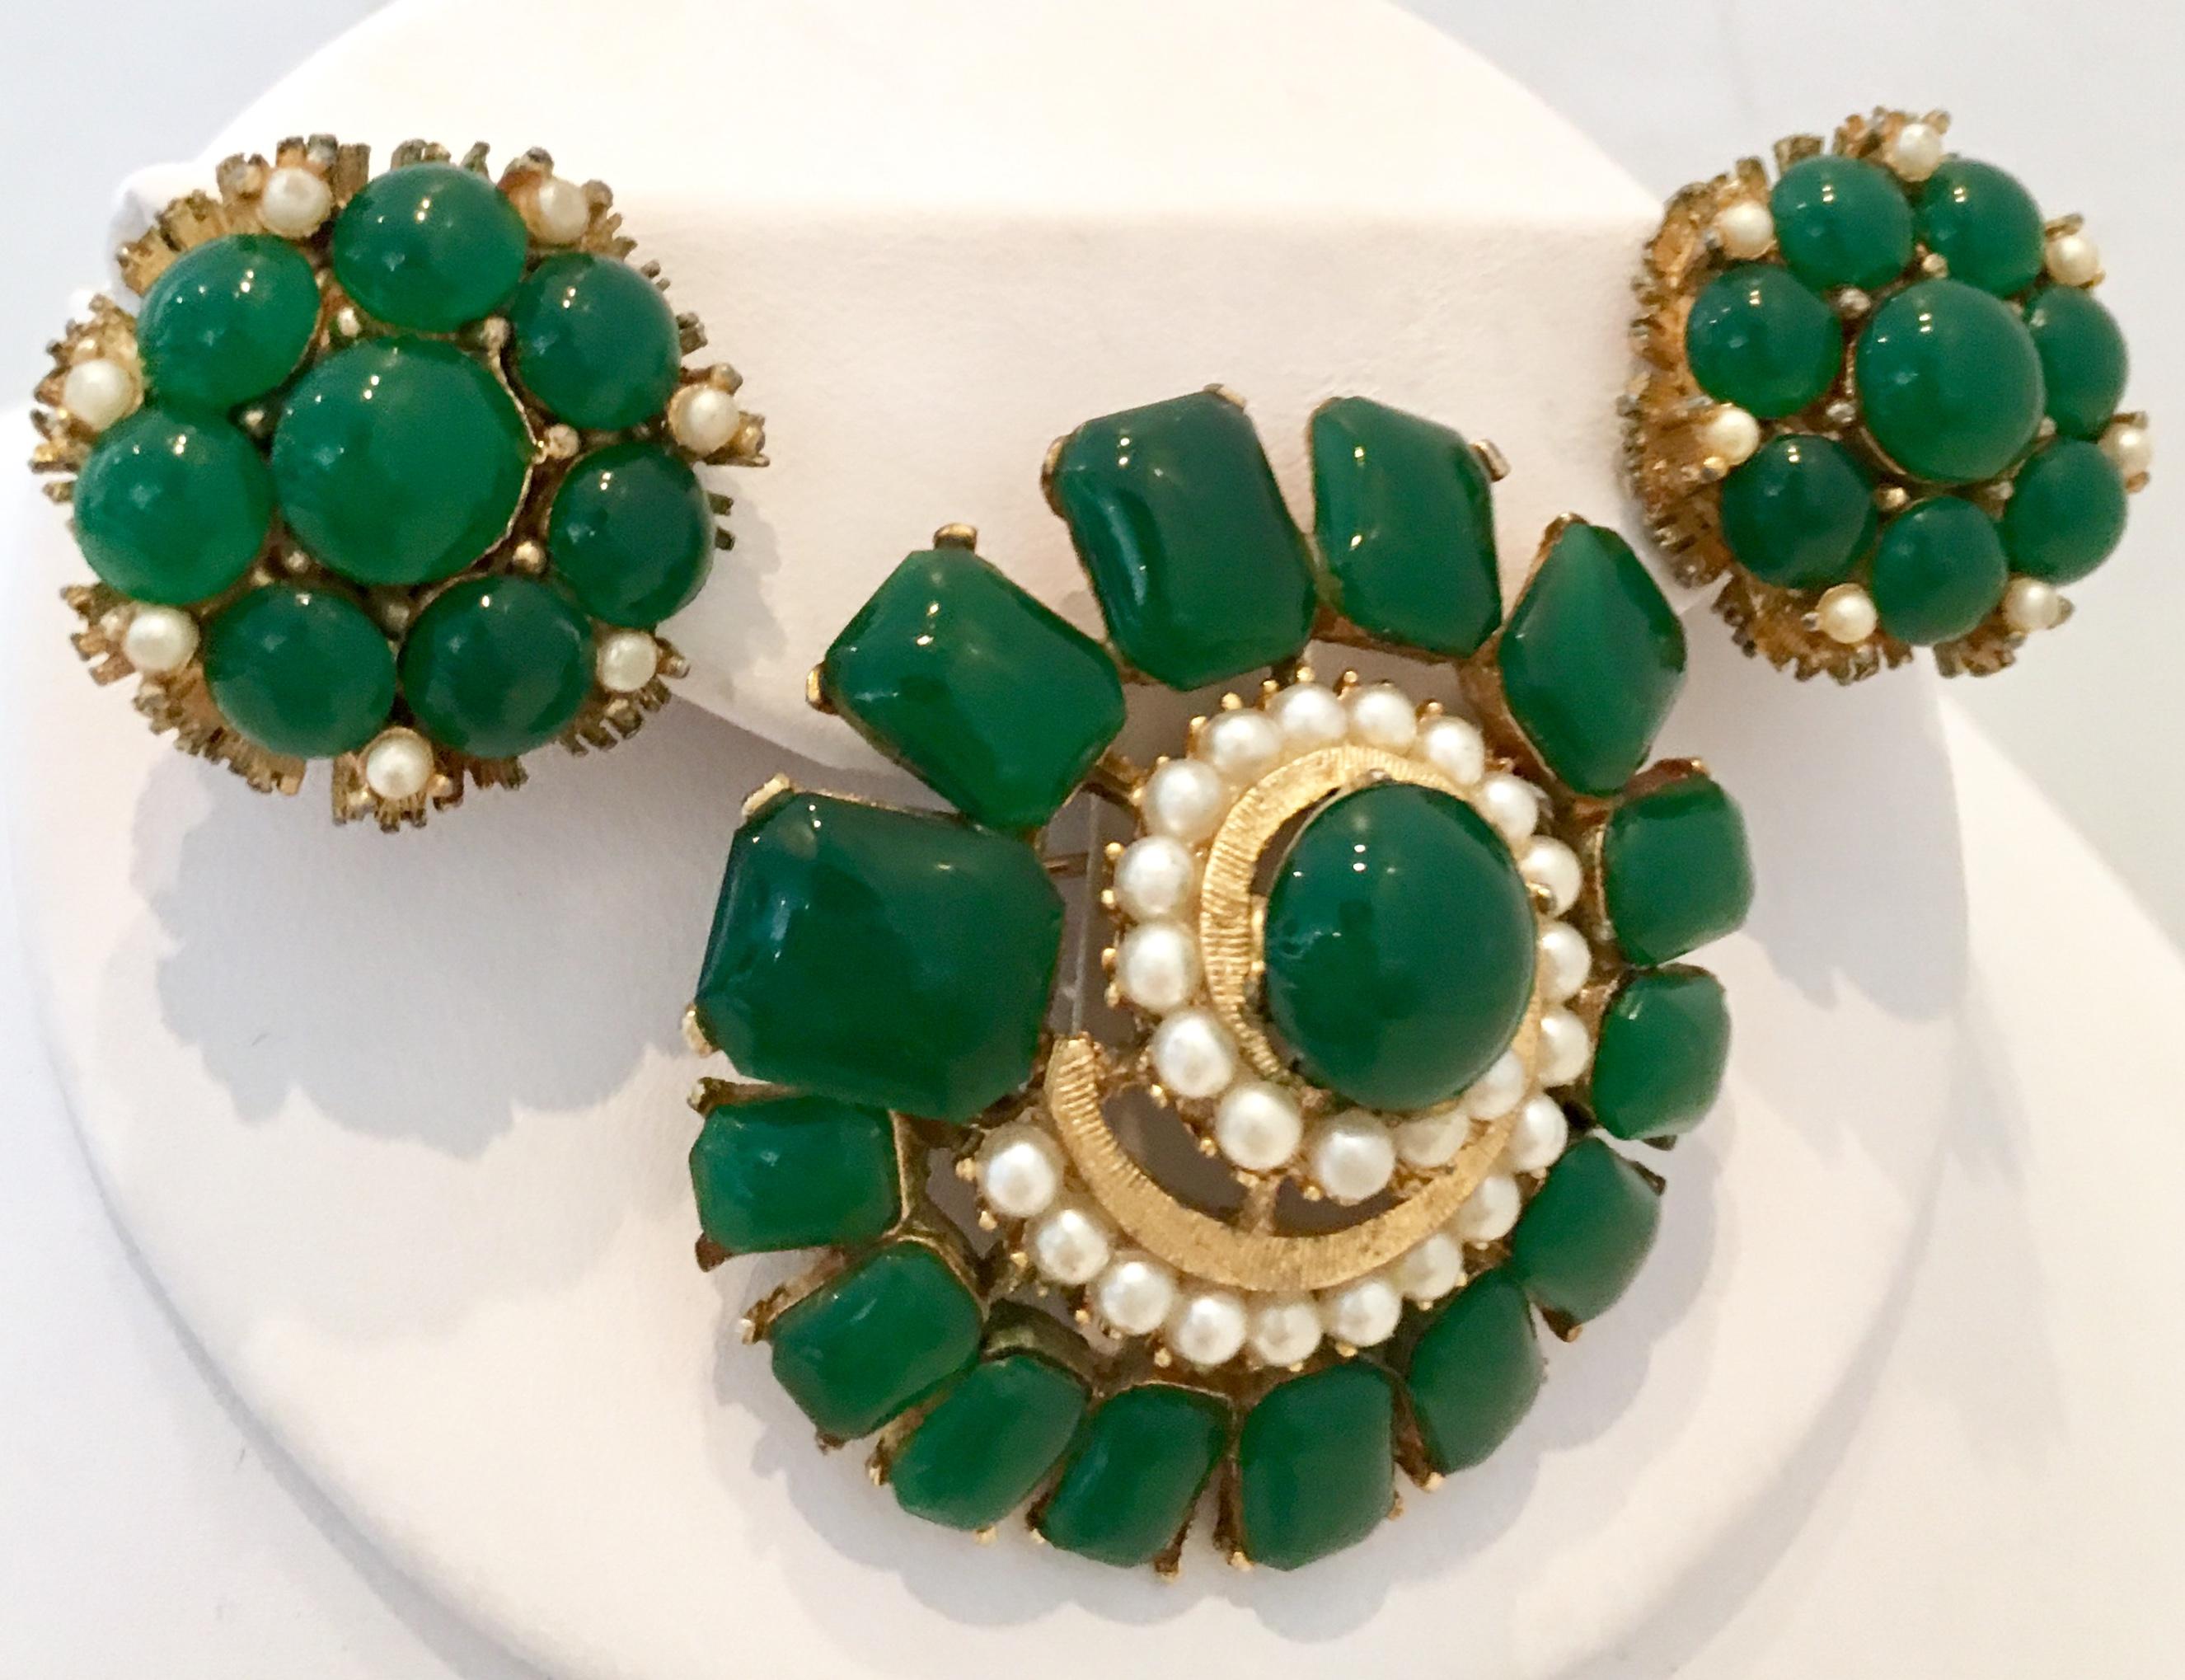 1950'S Gold Plate, Molded Glass & Faux Pearl Demi Parure Three Piece Set Brooch And Earrings. This finely crafted and rare three piece set features a textured gold plate base metal with deep green molded glass and round faux pearl prong set stones.